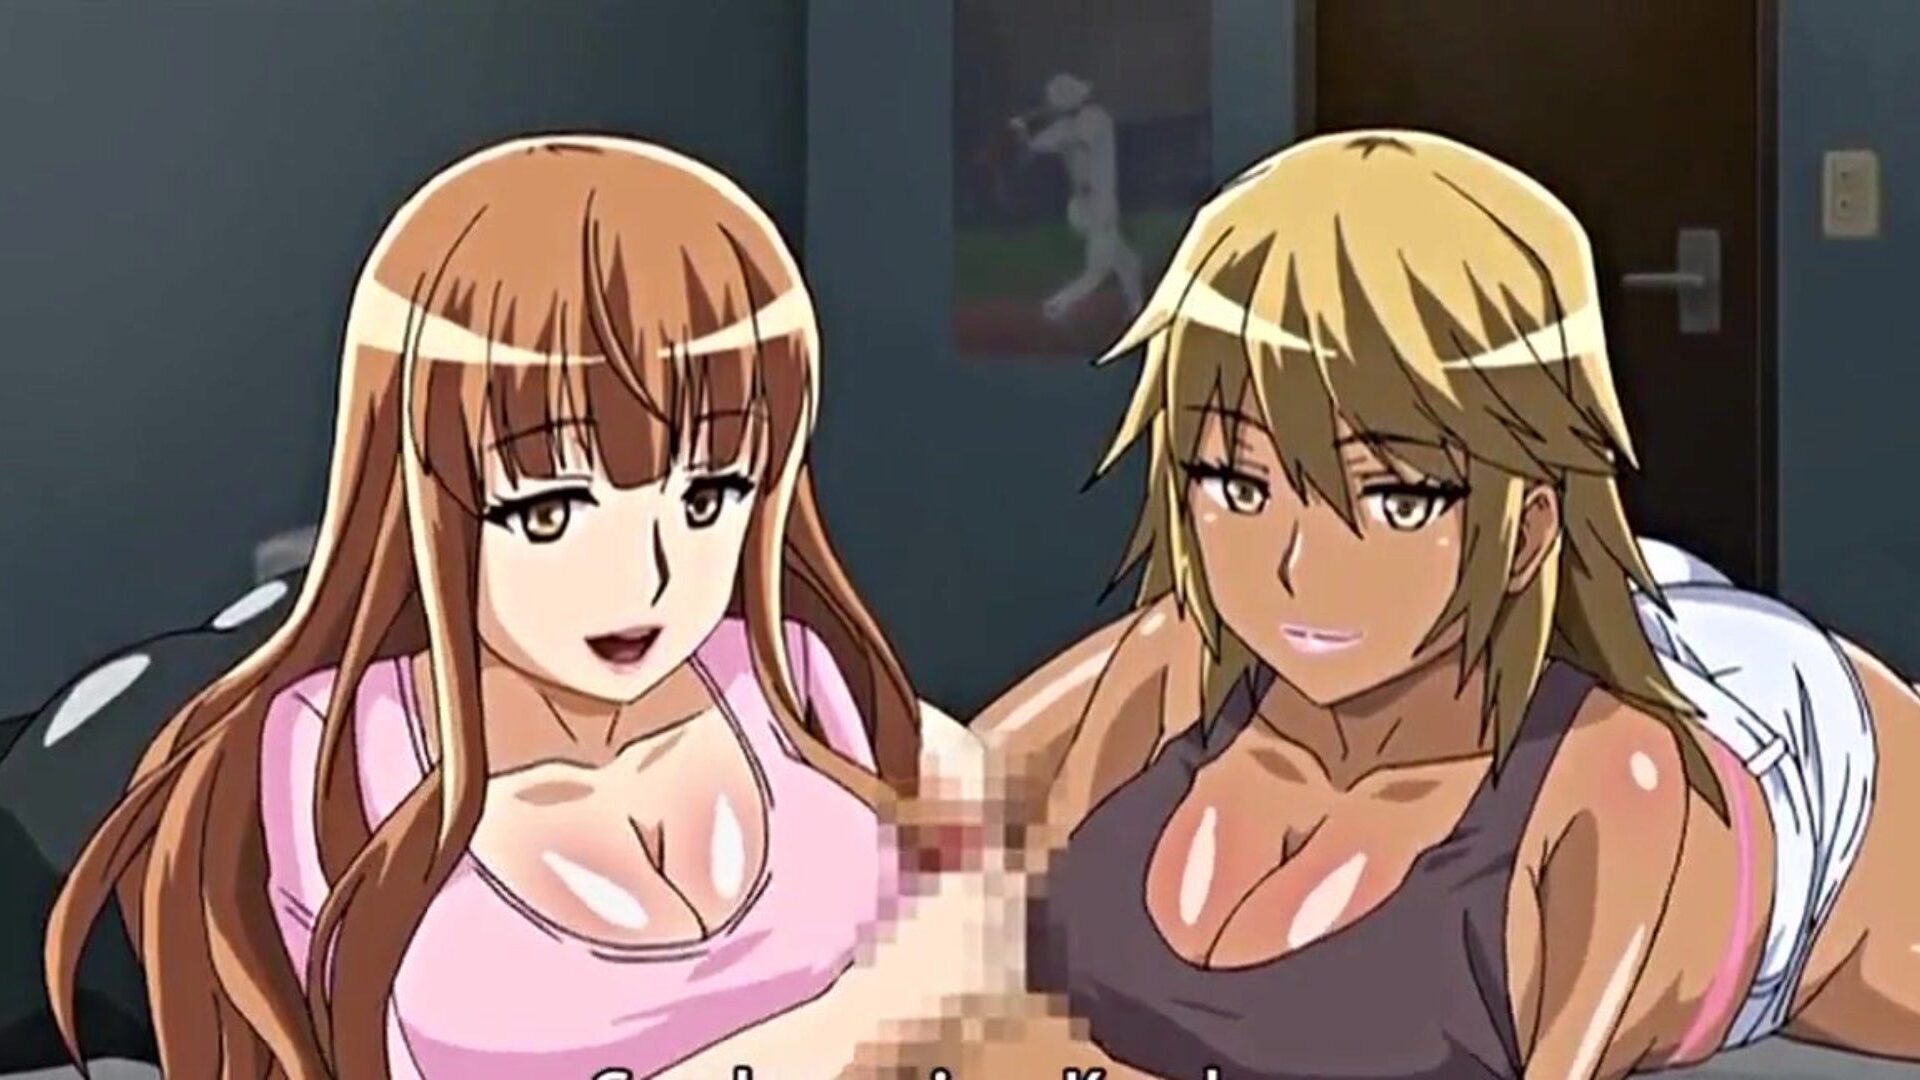 Sei-yariman Pakopako Nikki the Animation, Porn ac: xHamster Watch Sei-yariman Pakopako Nikki the Animation episode on xHamster, the most good HD bang-out tube web page with tons of free Cartoon & Hentai pornography episodes